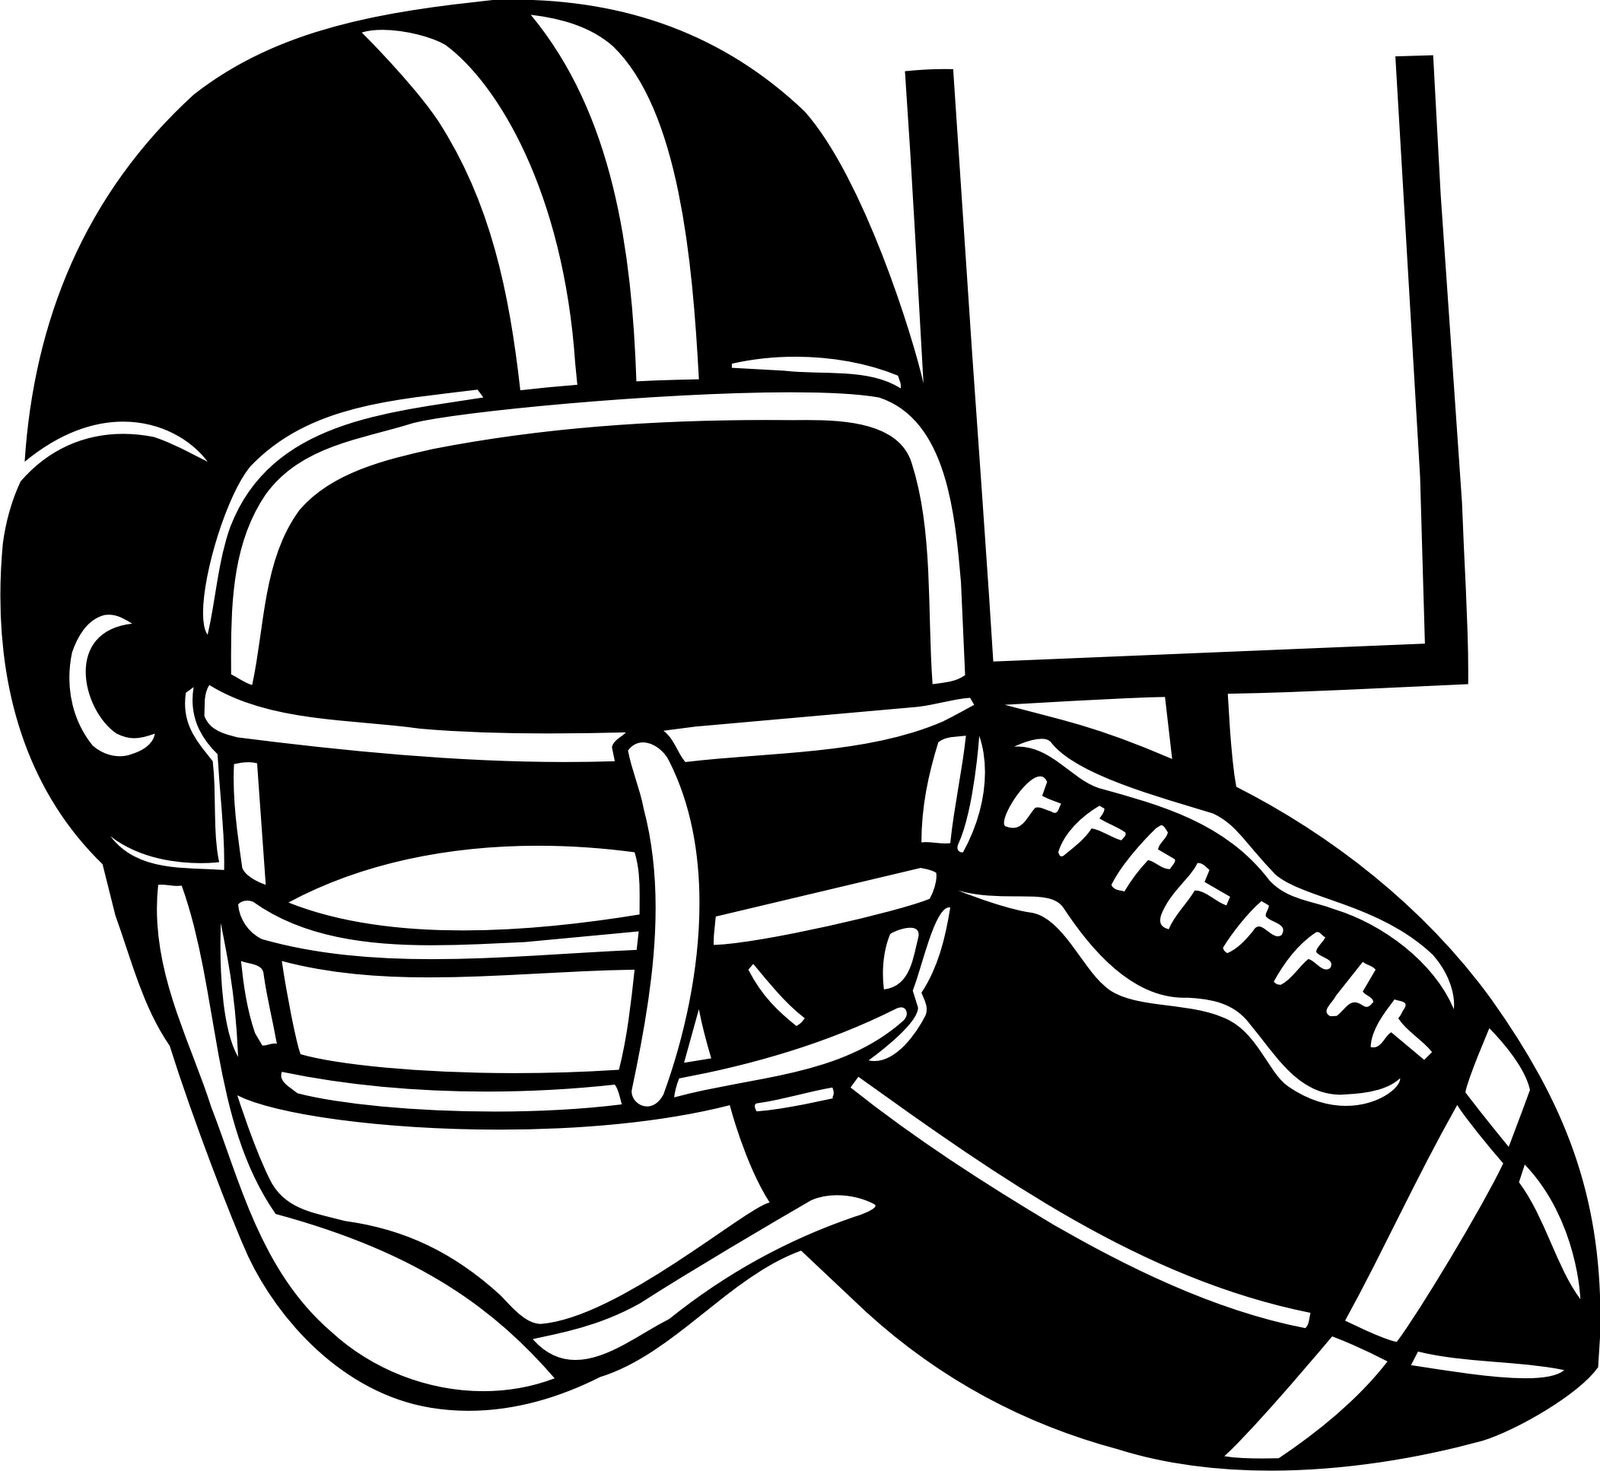 Score Big with Our Collection of Football Clip Art